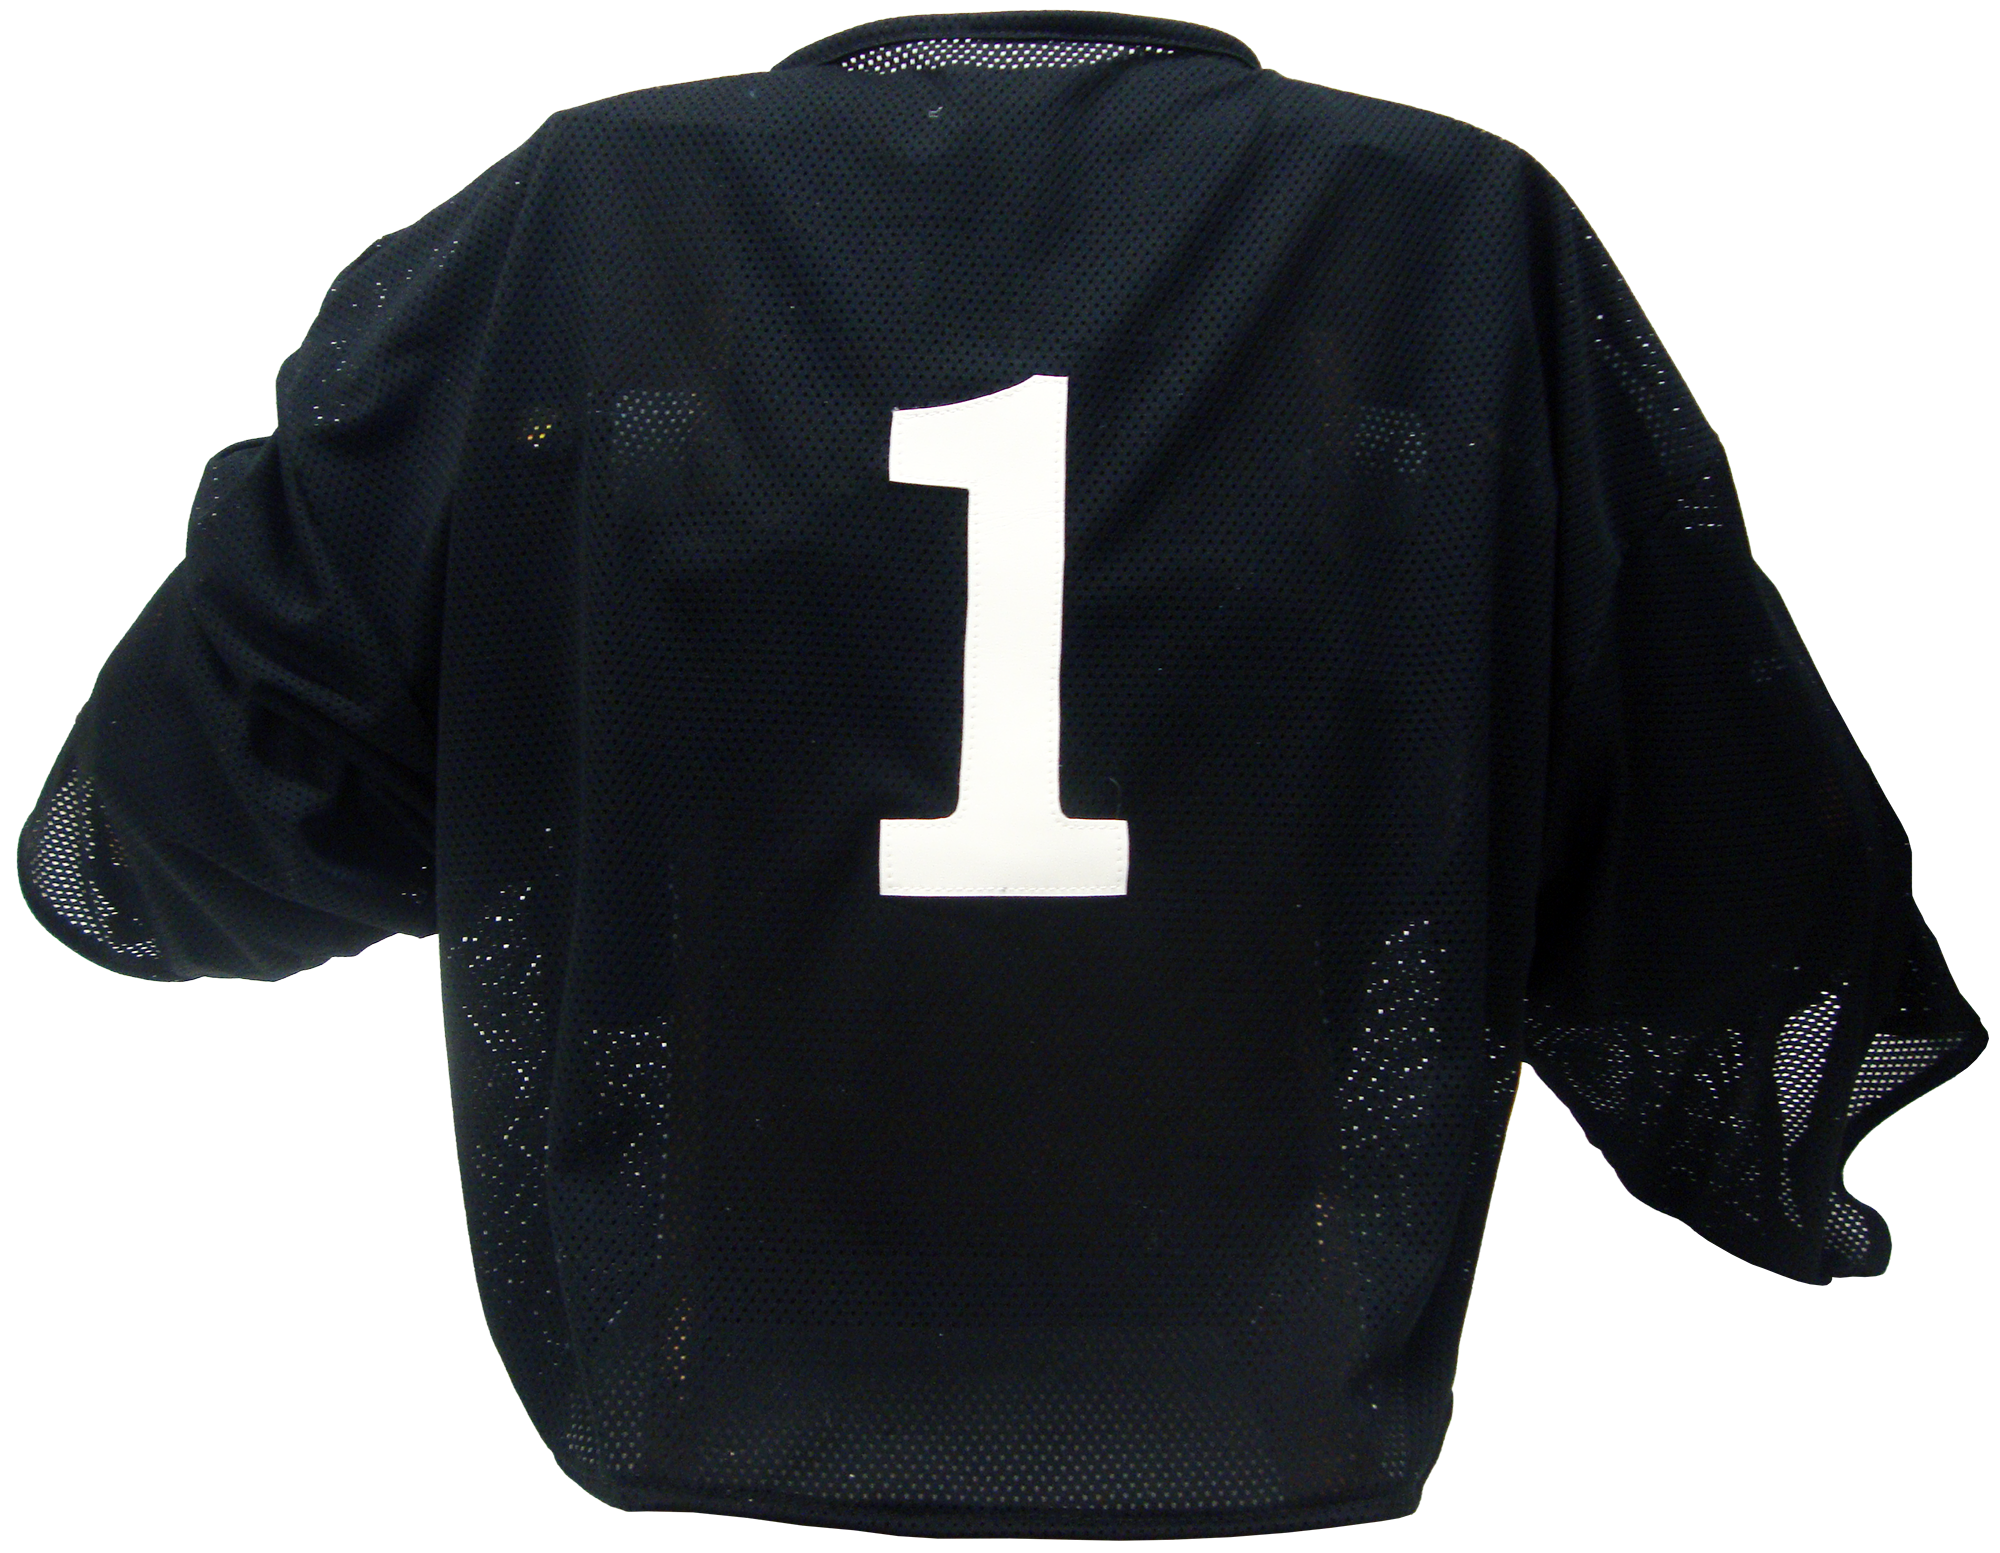 Black jersey with number one on it